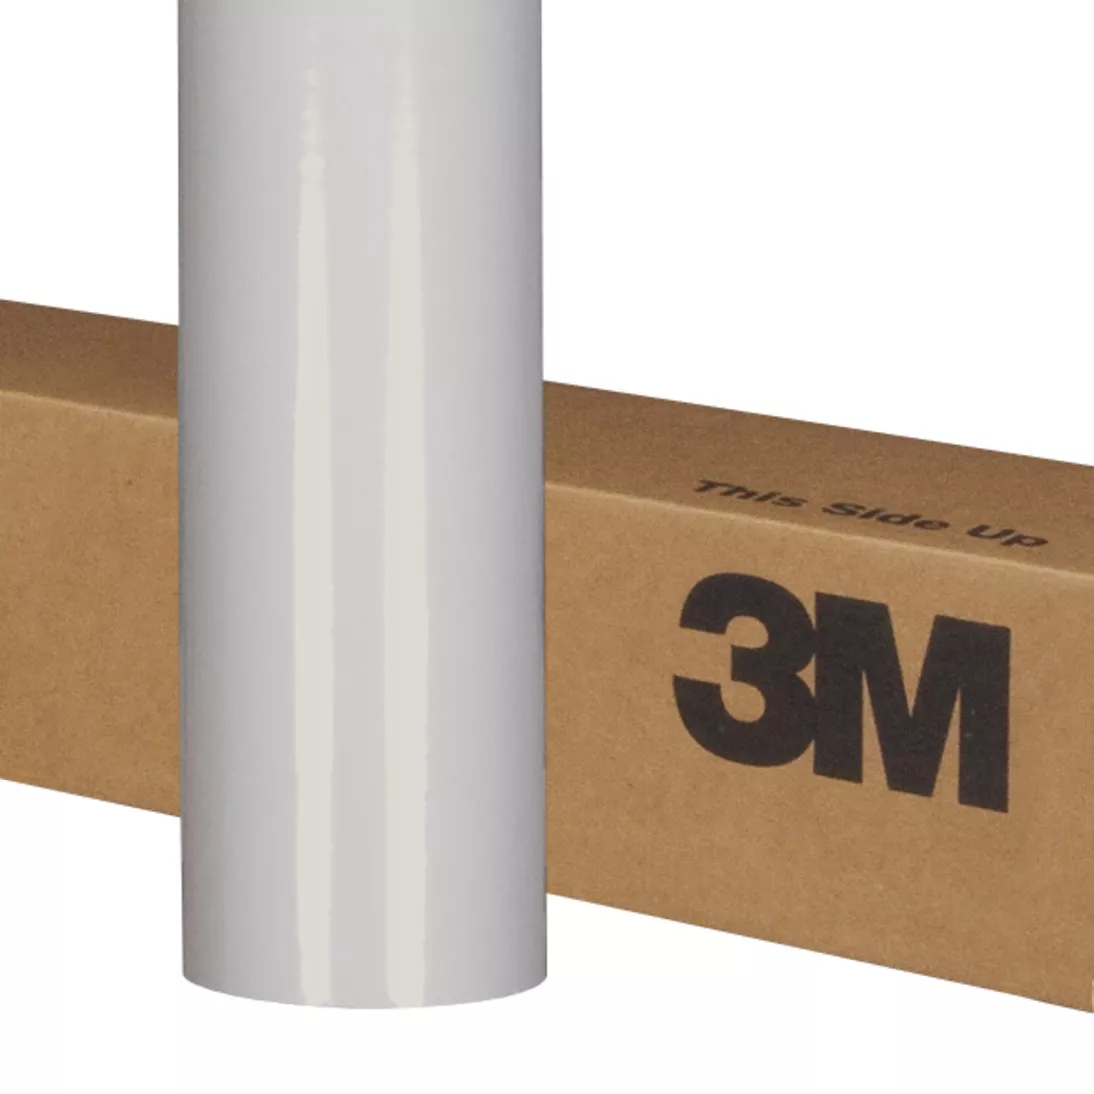 3M™ Scotchcal™ ElectroCut™ Graphic Film 7125-11, Pearl Gray, 24 in x 50
yd